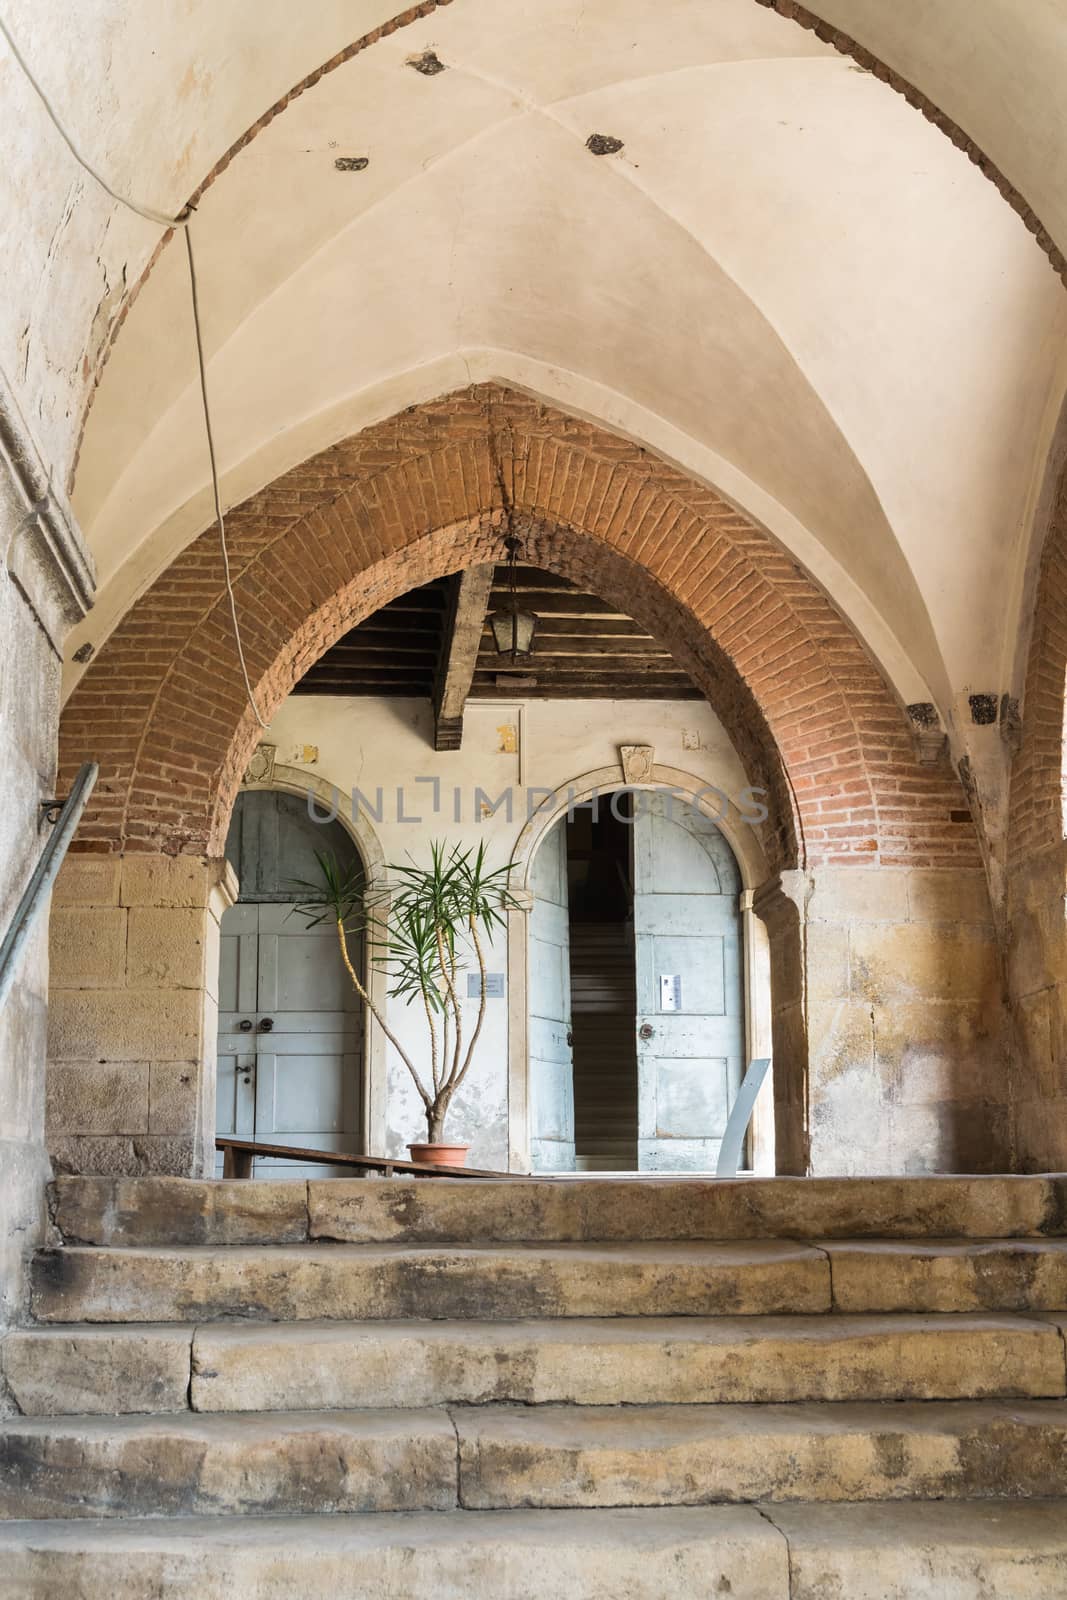 Brick pointed arch in an ancient Benedictine monastery. by Isaac74